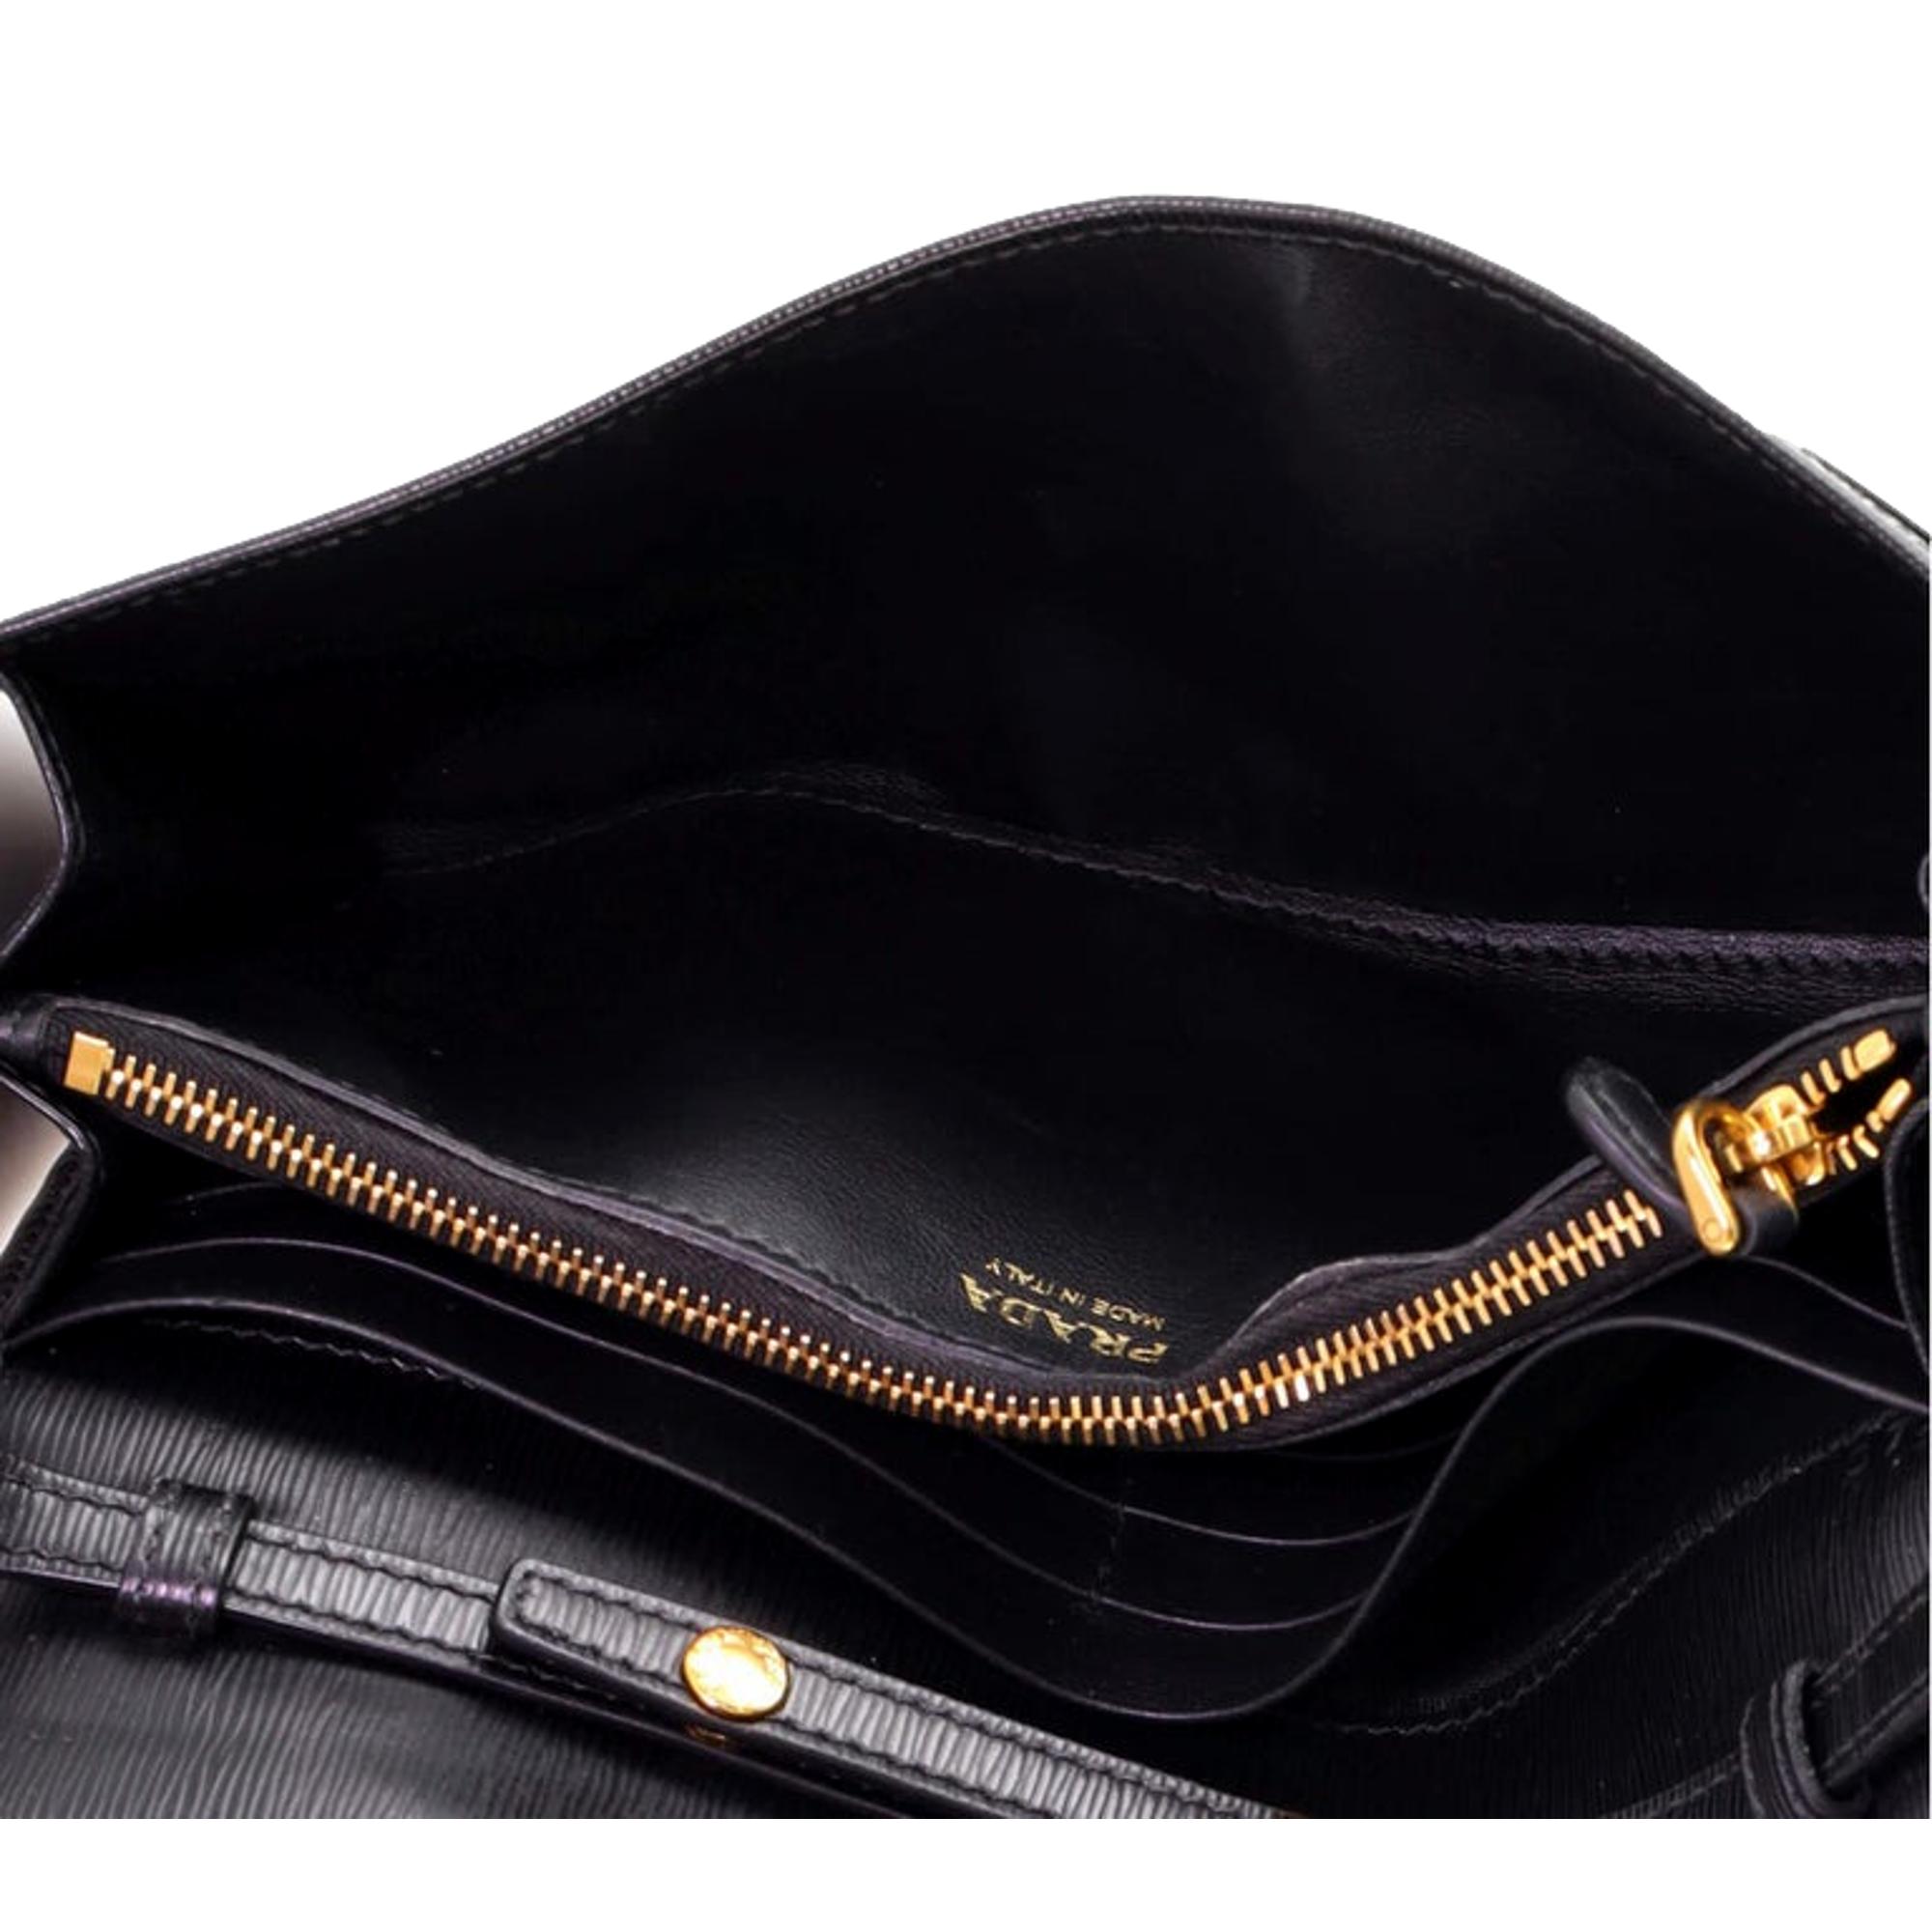 Prada Black Vitello Move Leather Chain Crossbody Wallet Clutch at_Queen_Bee_of_Beverly_Hills